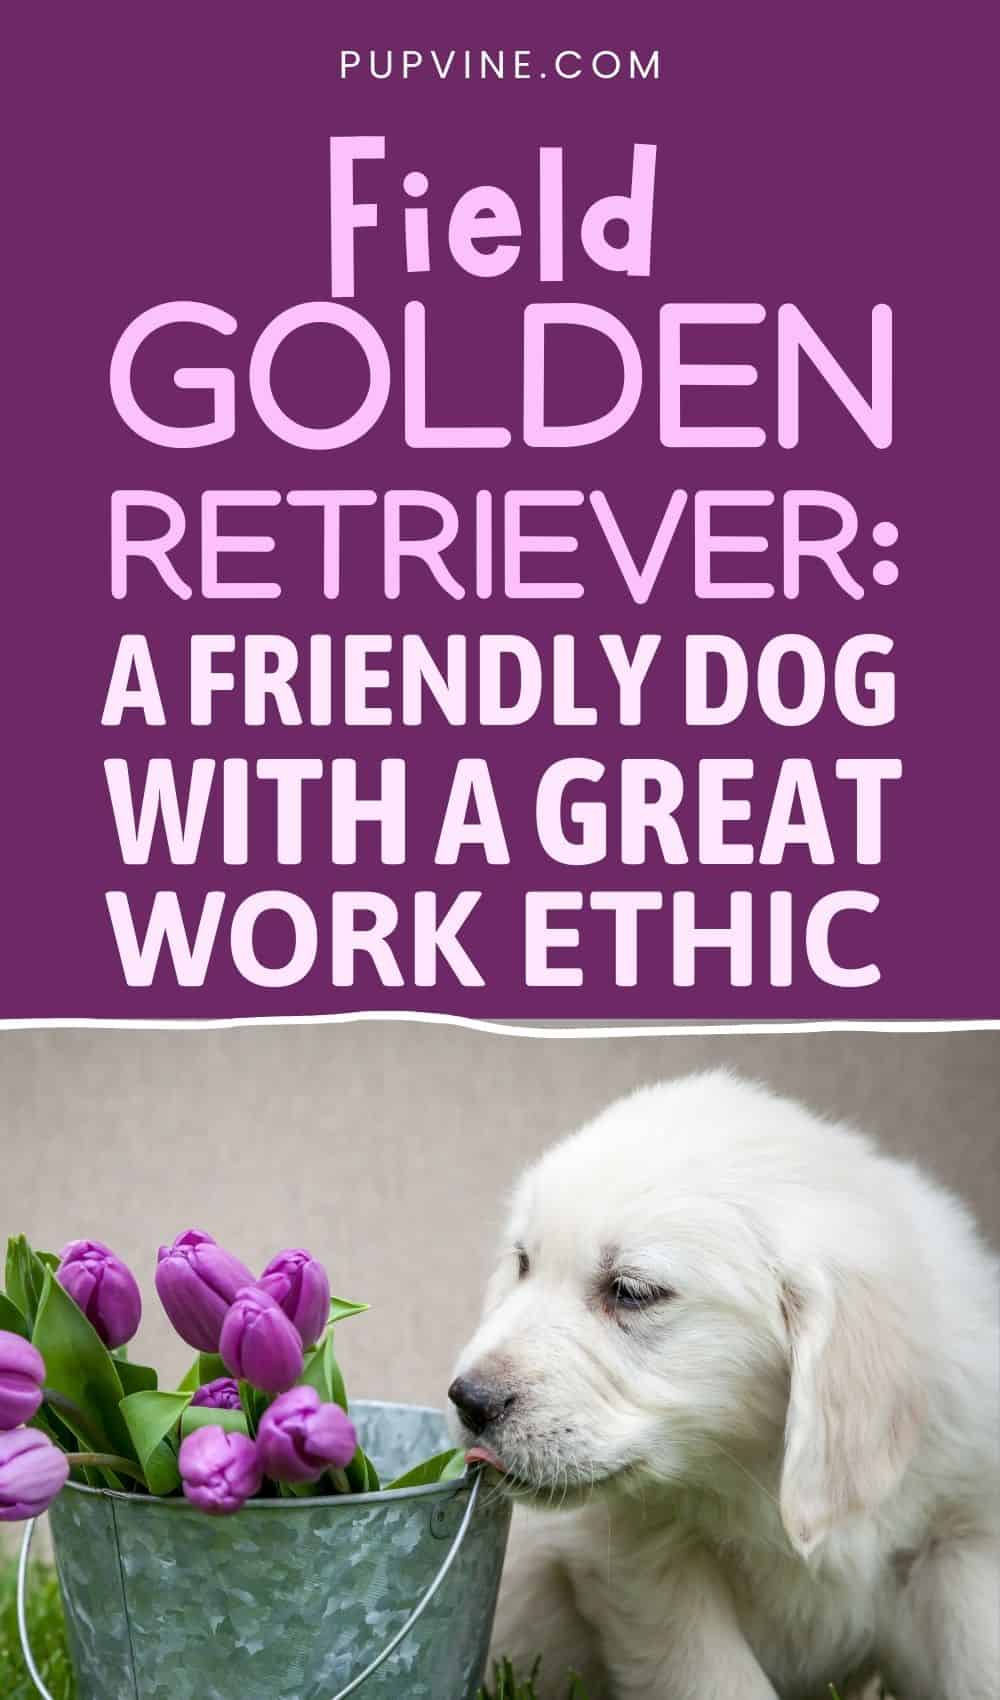 Field Golden Retriever A Friendly Dog With a Great Work Ethic